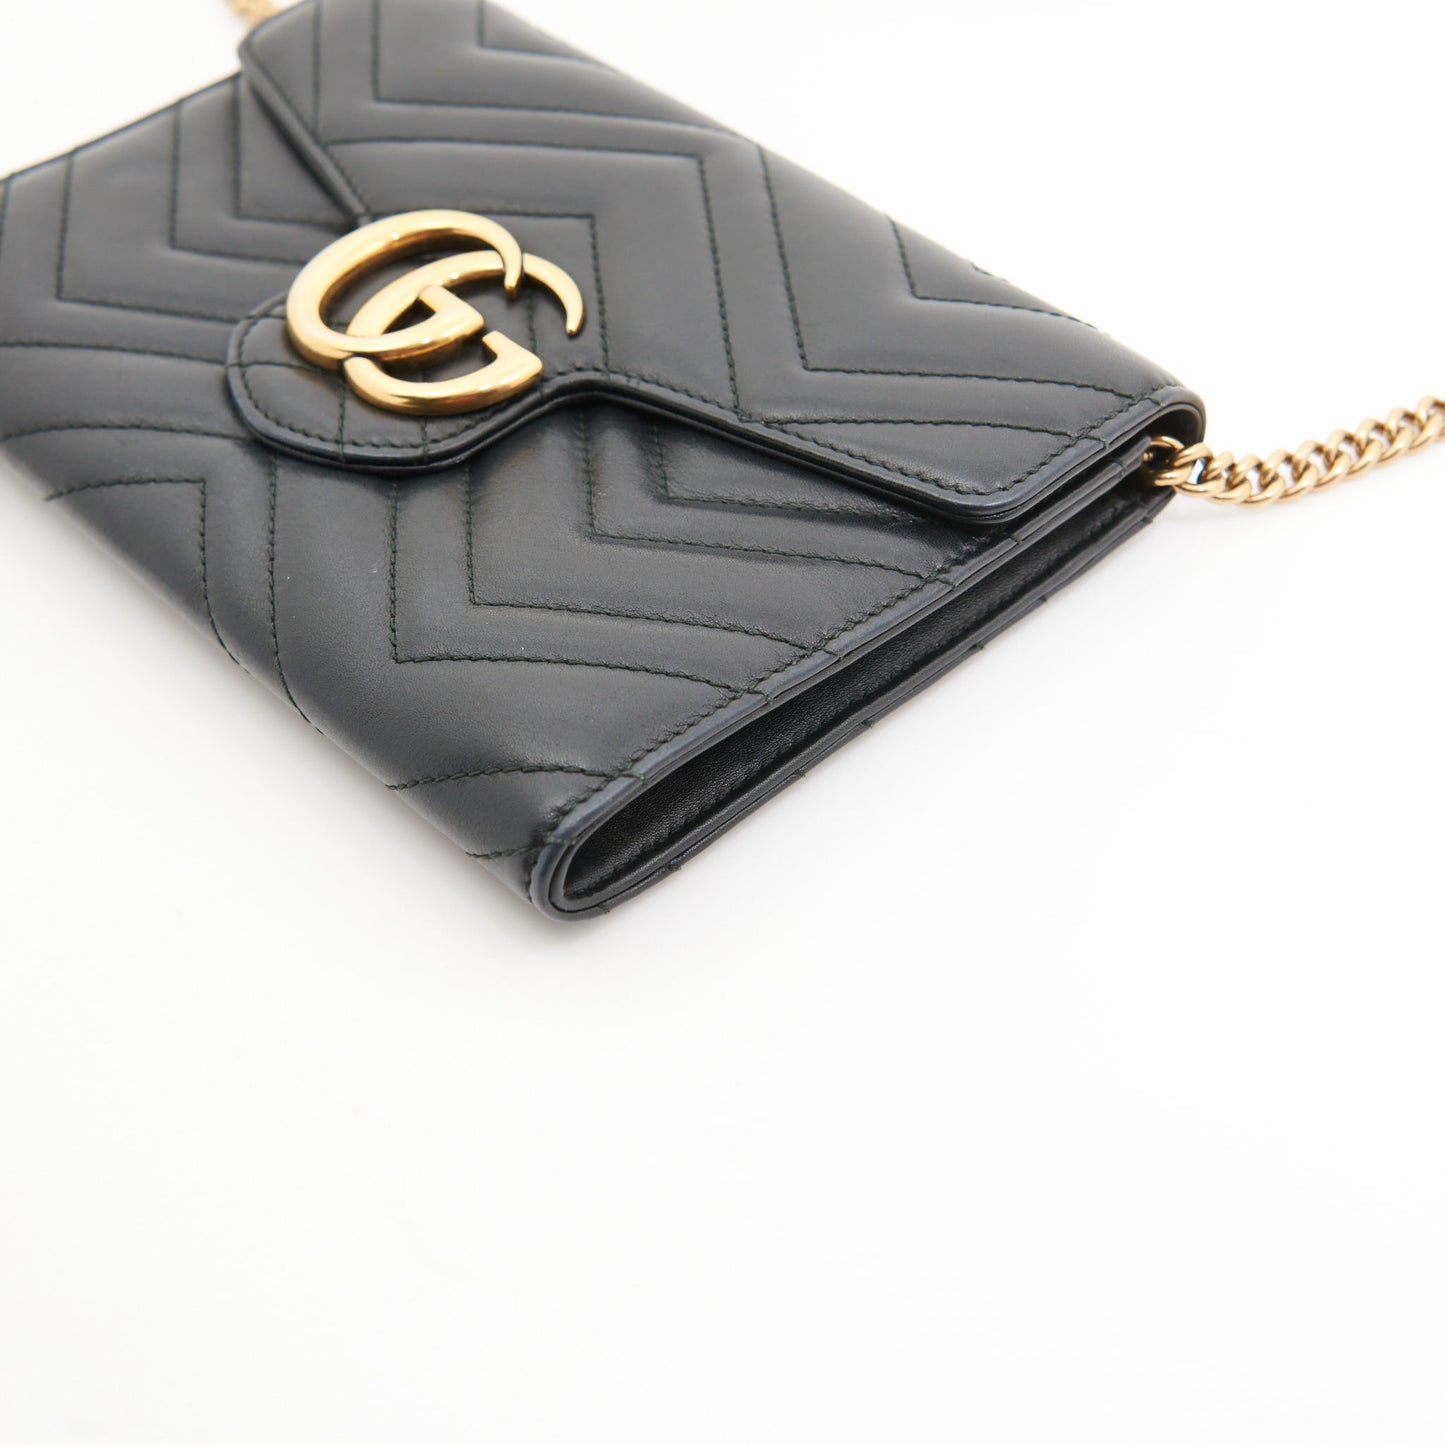 Gucci Leather Marmont on Chain in Black GHW